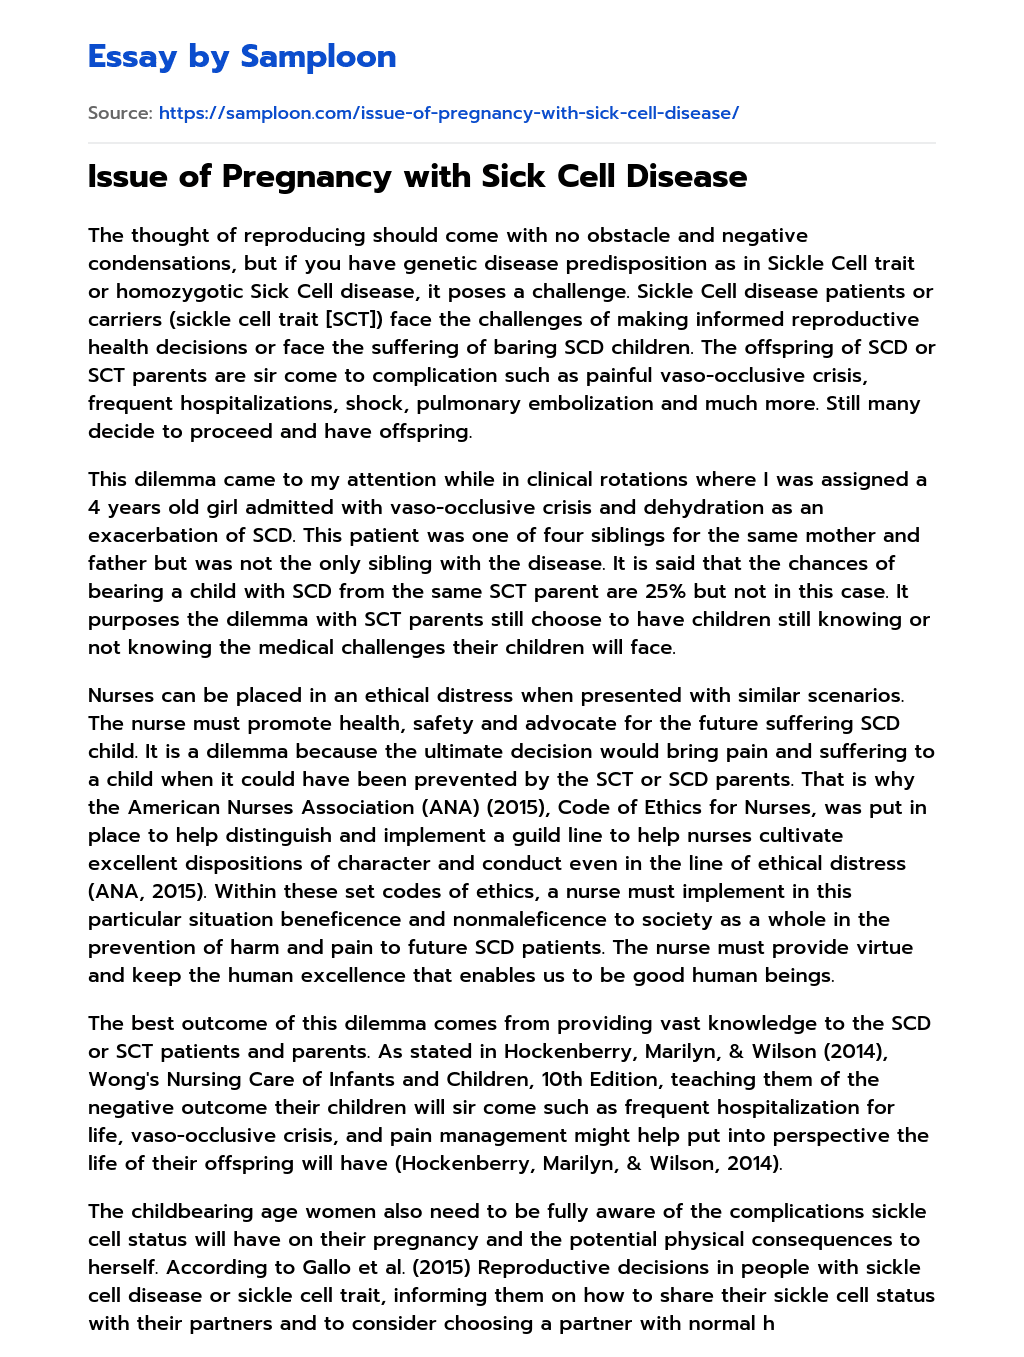 Issue of Pregnancy with Sick Cell Disease essay